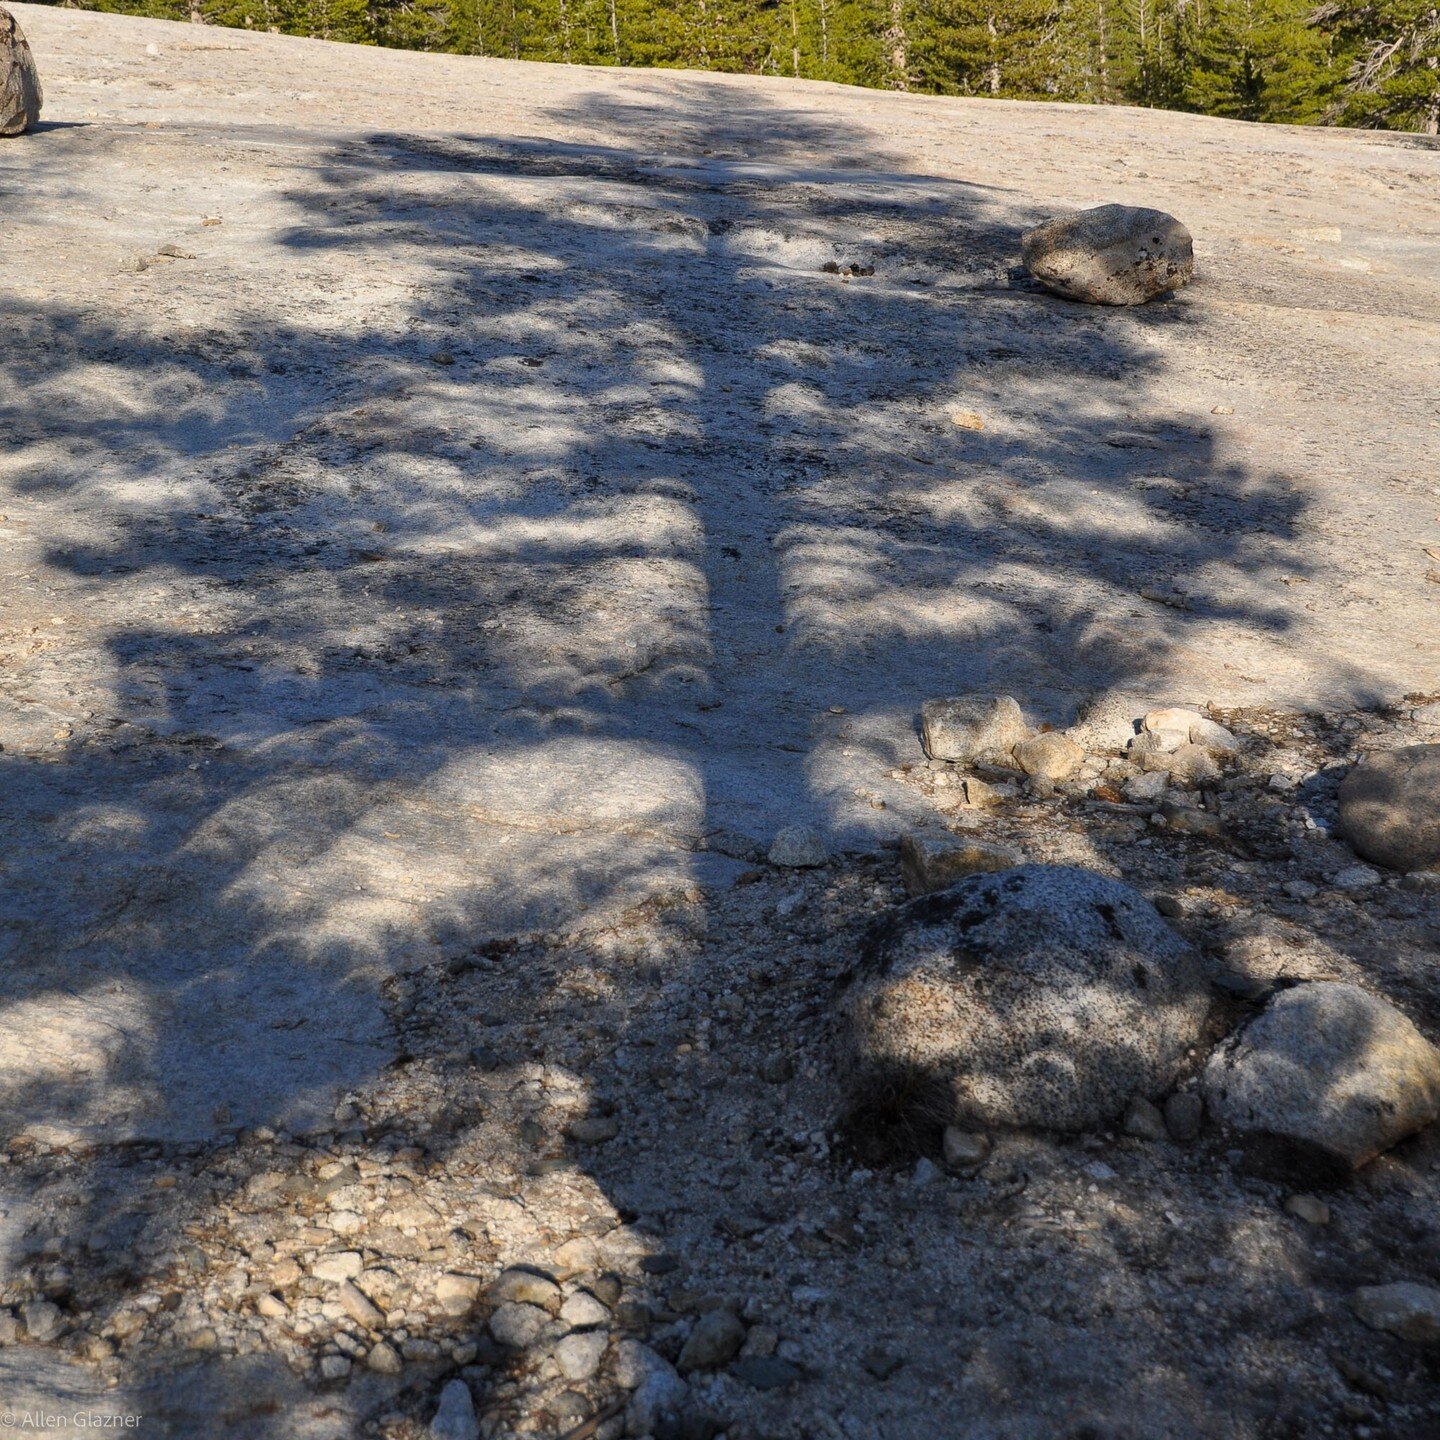 Eclipse crescents cast on Lembert Dome apron in shadow of pine tree during annular eclipse of 20 May 2012